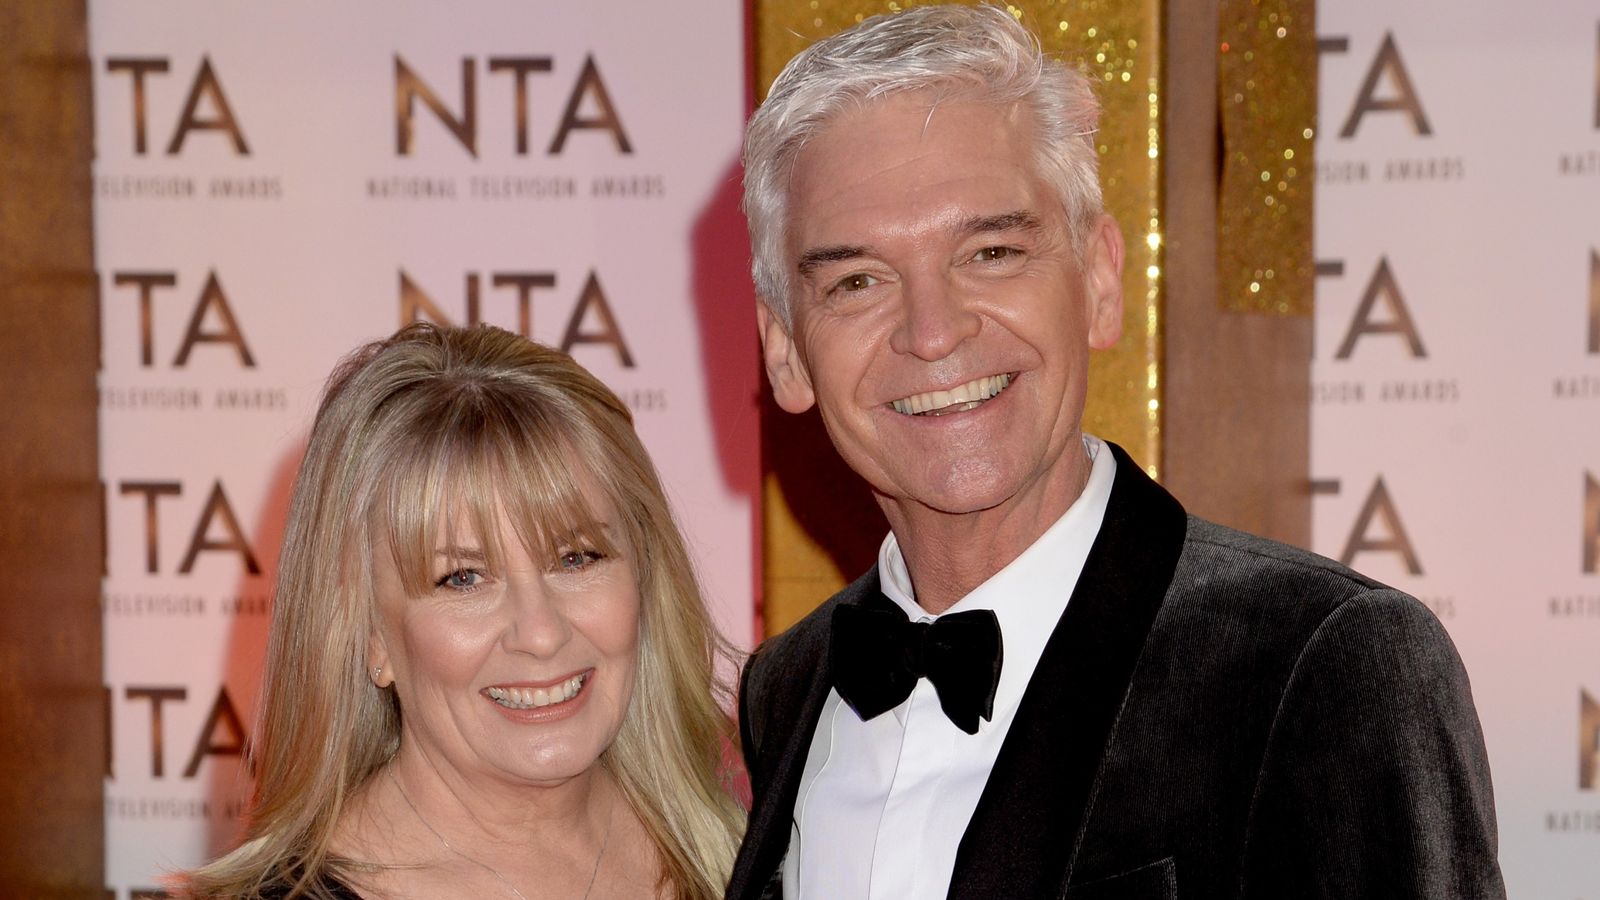 Phillip Schofield Admits He Knew He Was Gay When He Got Married In 1993 Ents And Arts News Sky